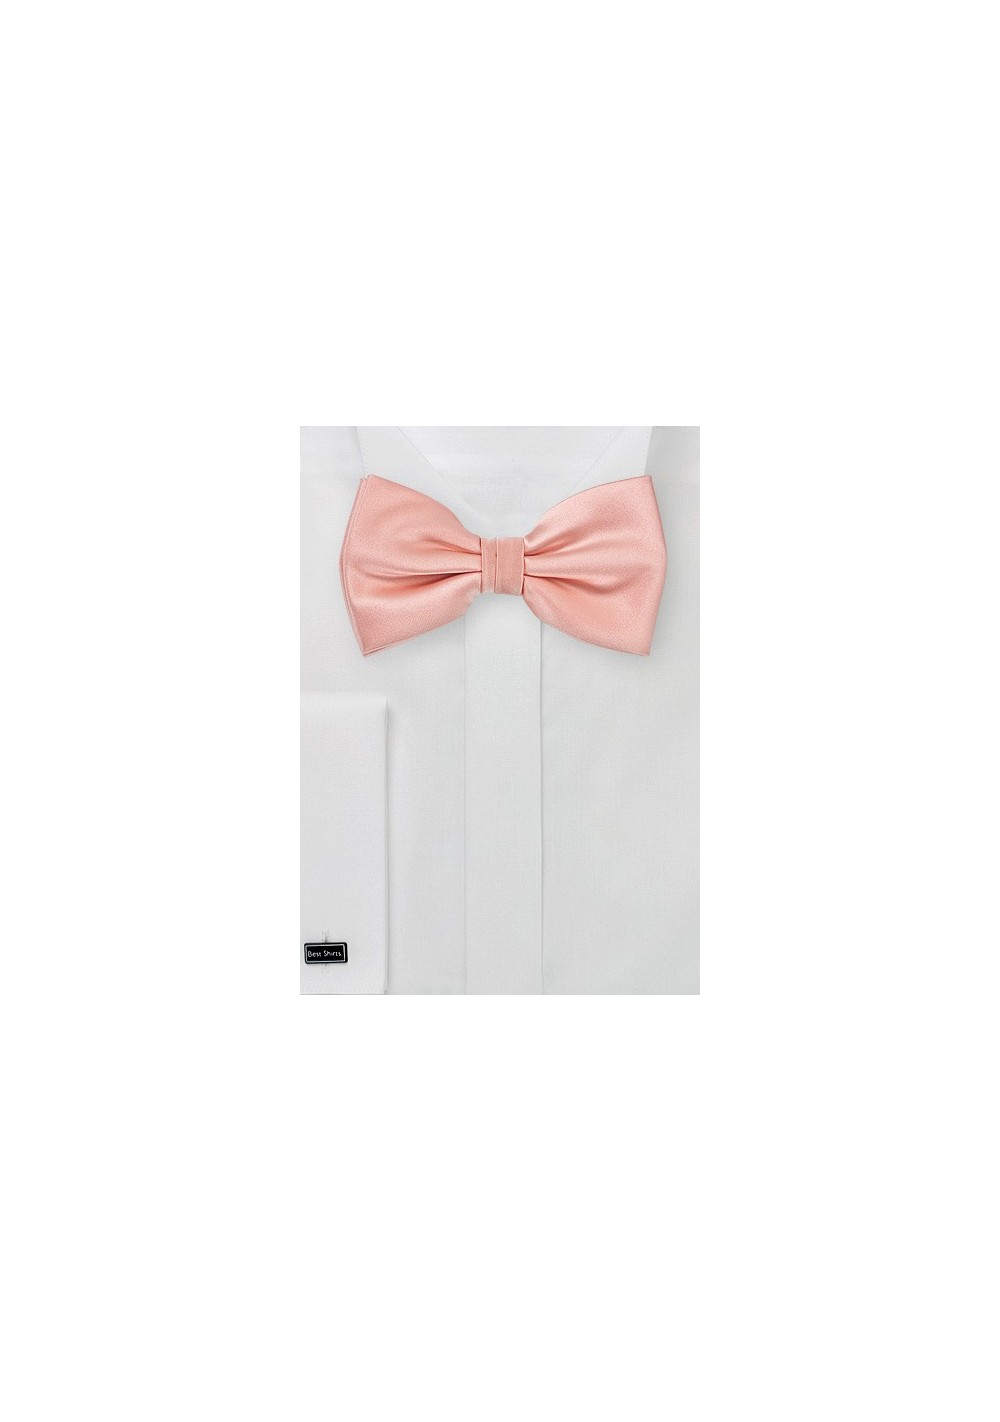 Candy Pink Mens Bow Tie